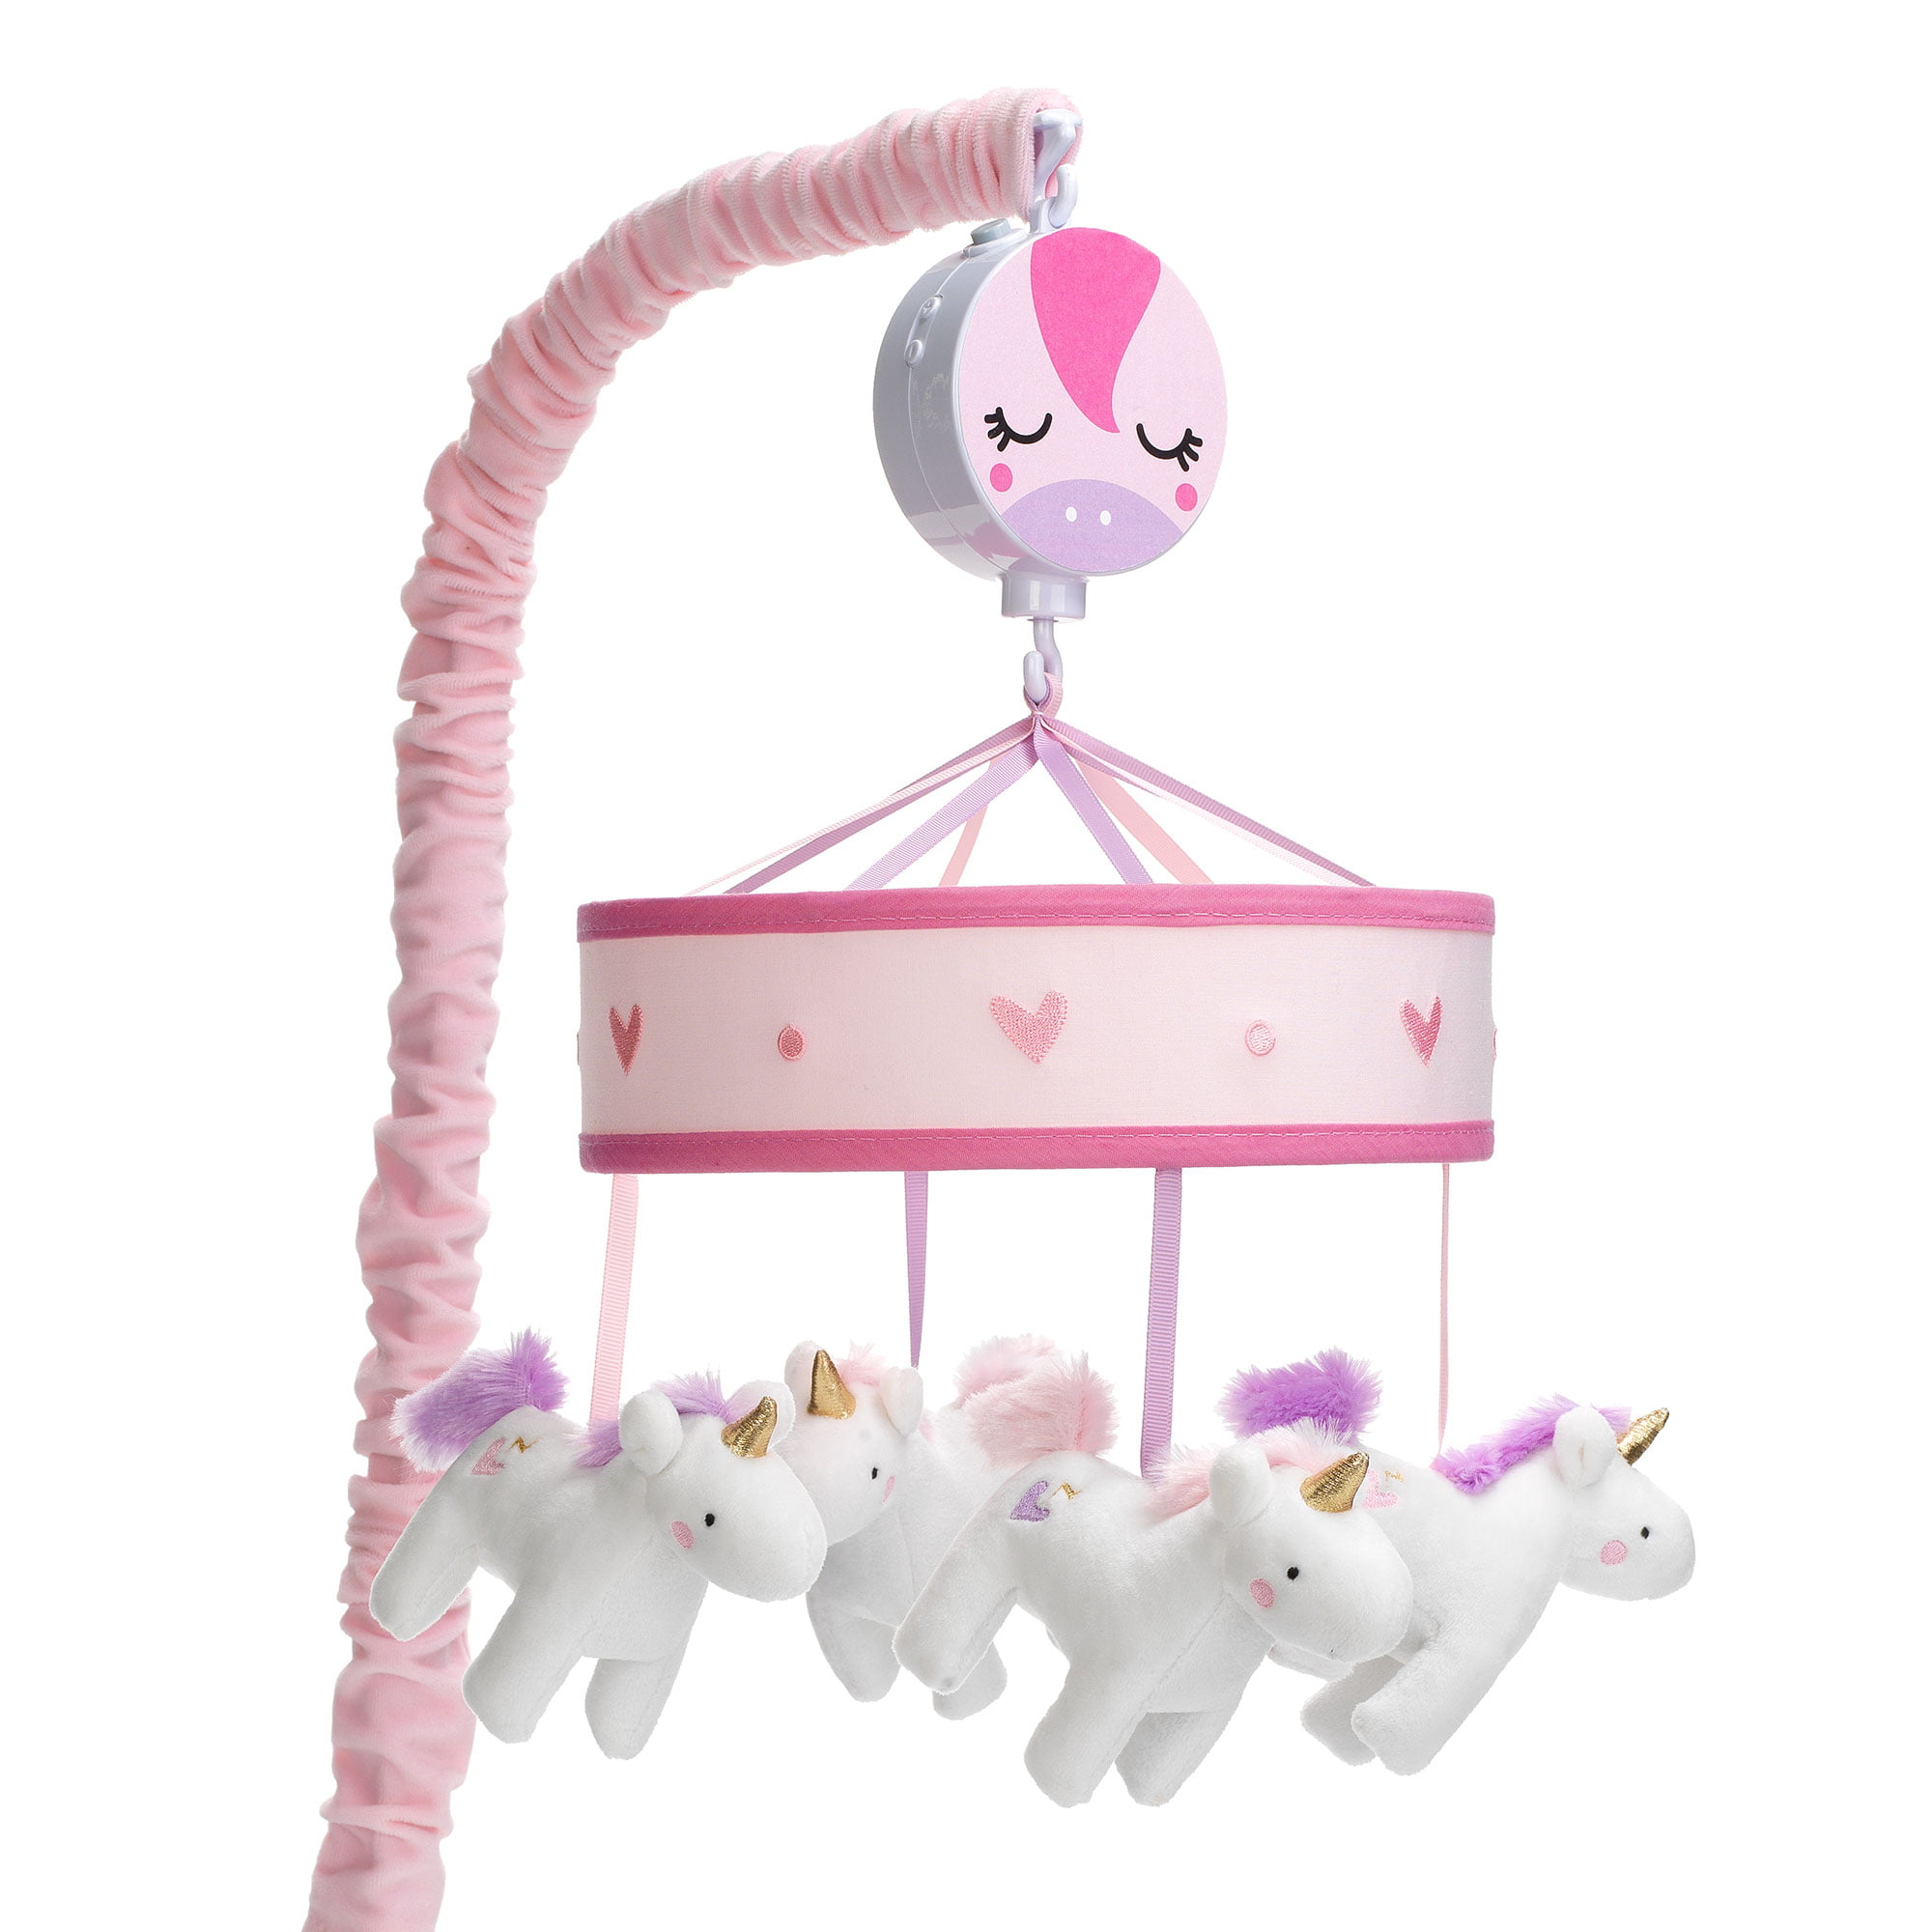 Lambs &amp; Ivy Magic Unicorn White/Pink Musical Baby Crib Mobile Soother Toy